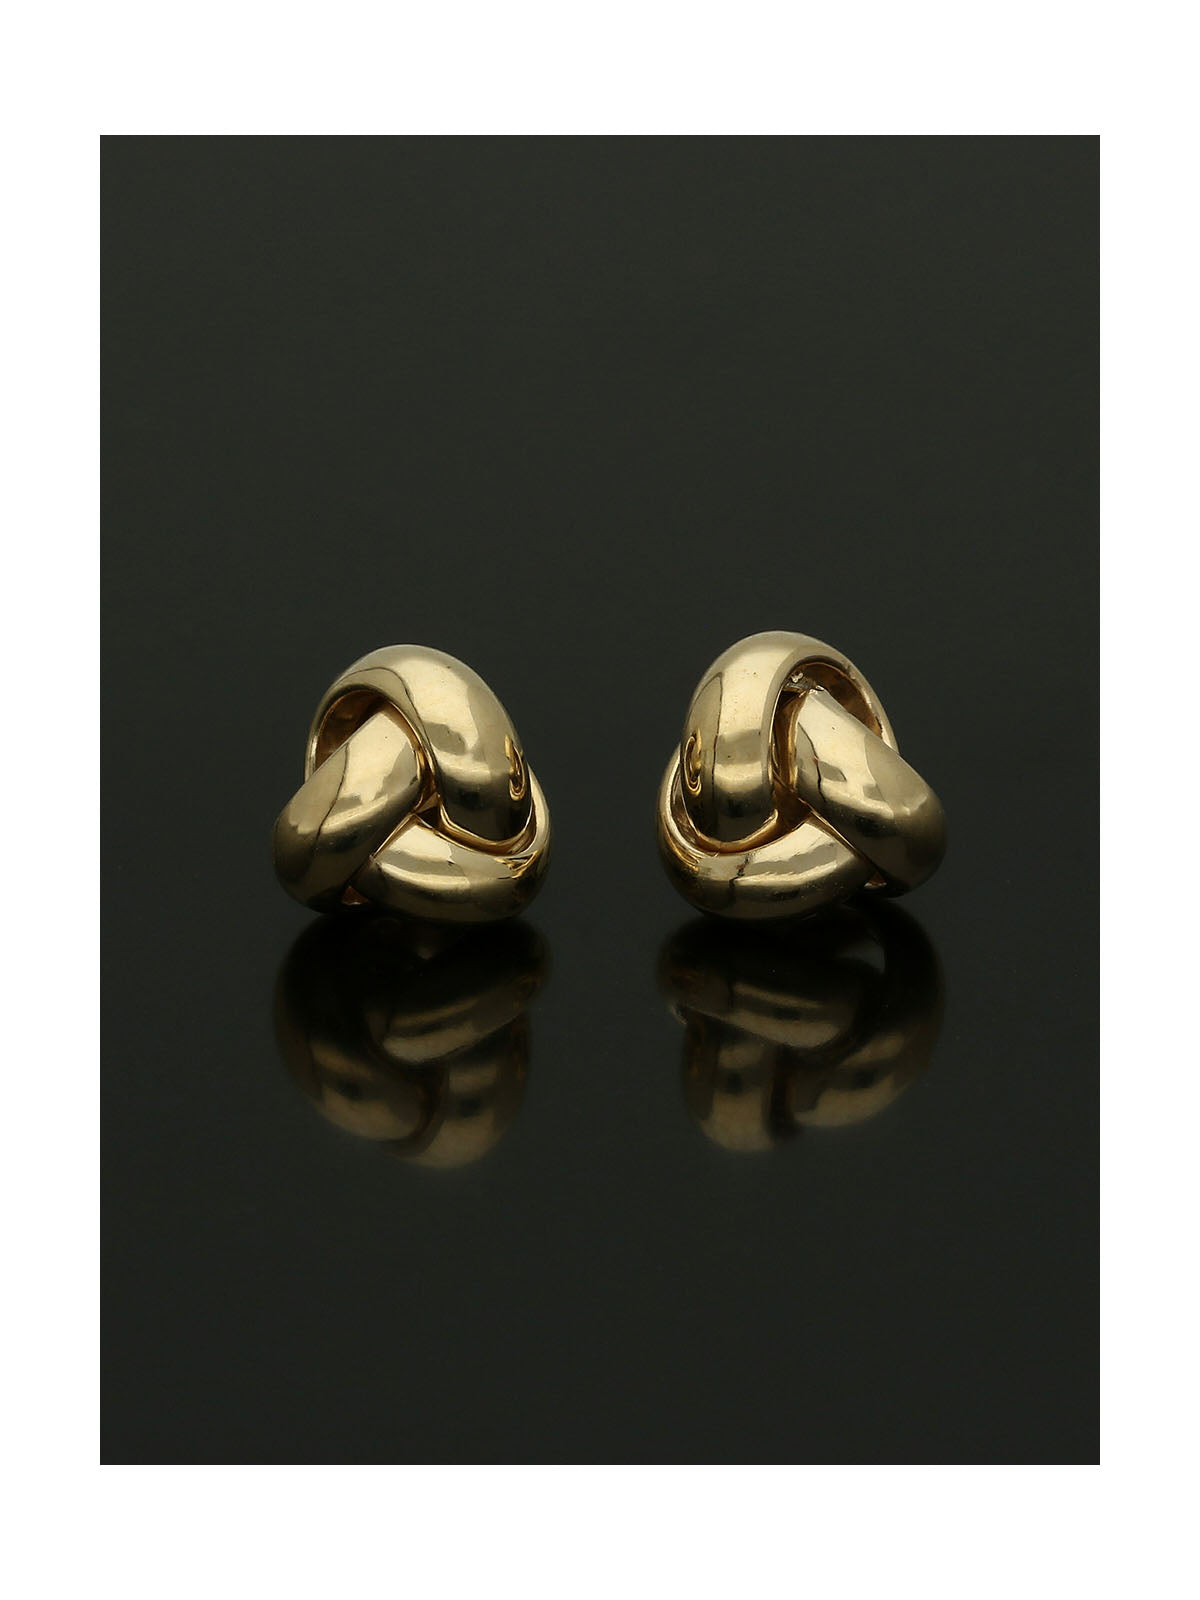 Knot Stud Earrings in 9ct Yellow Gold